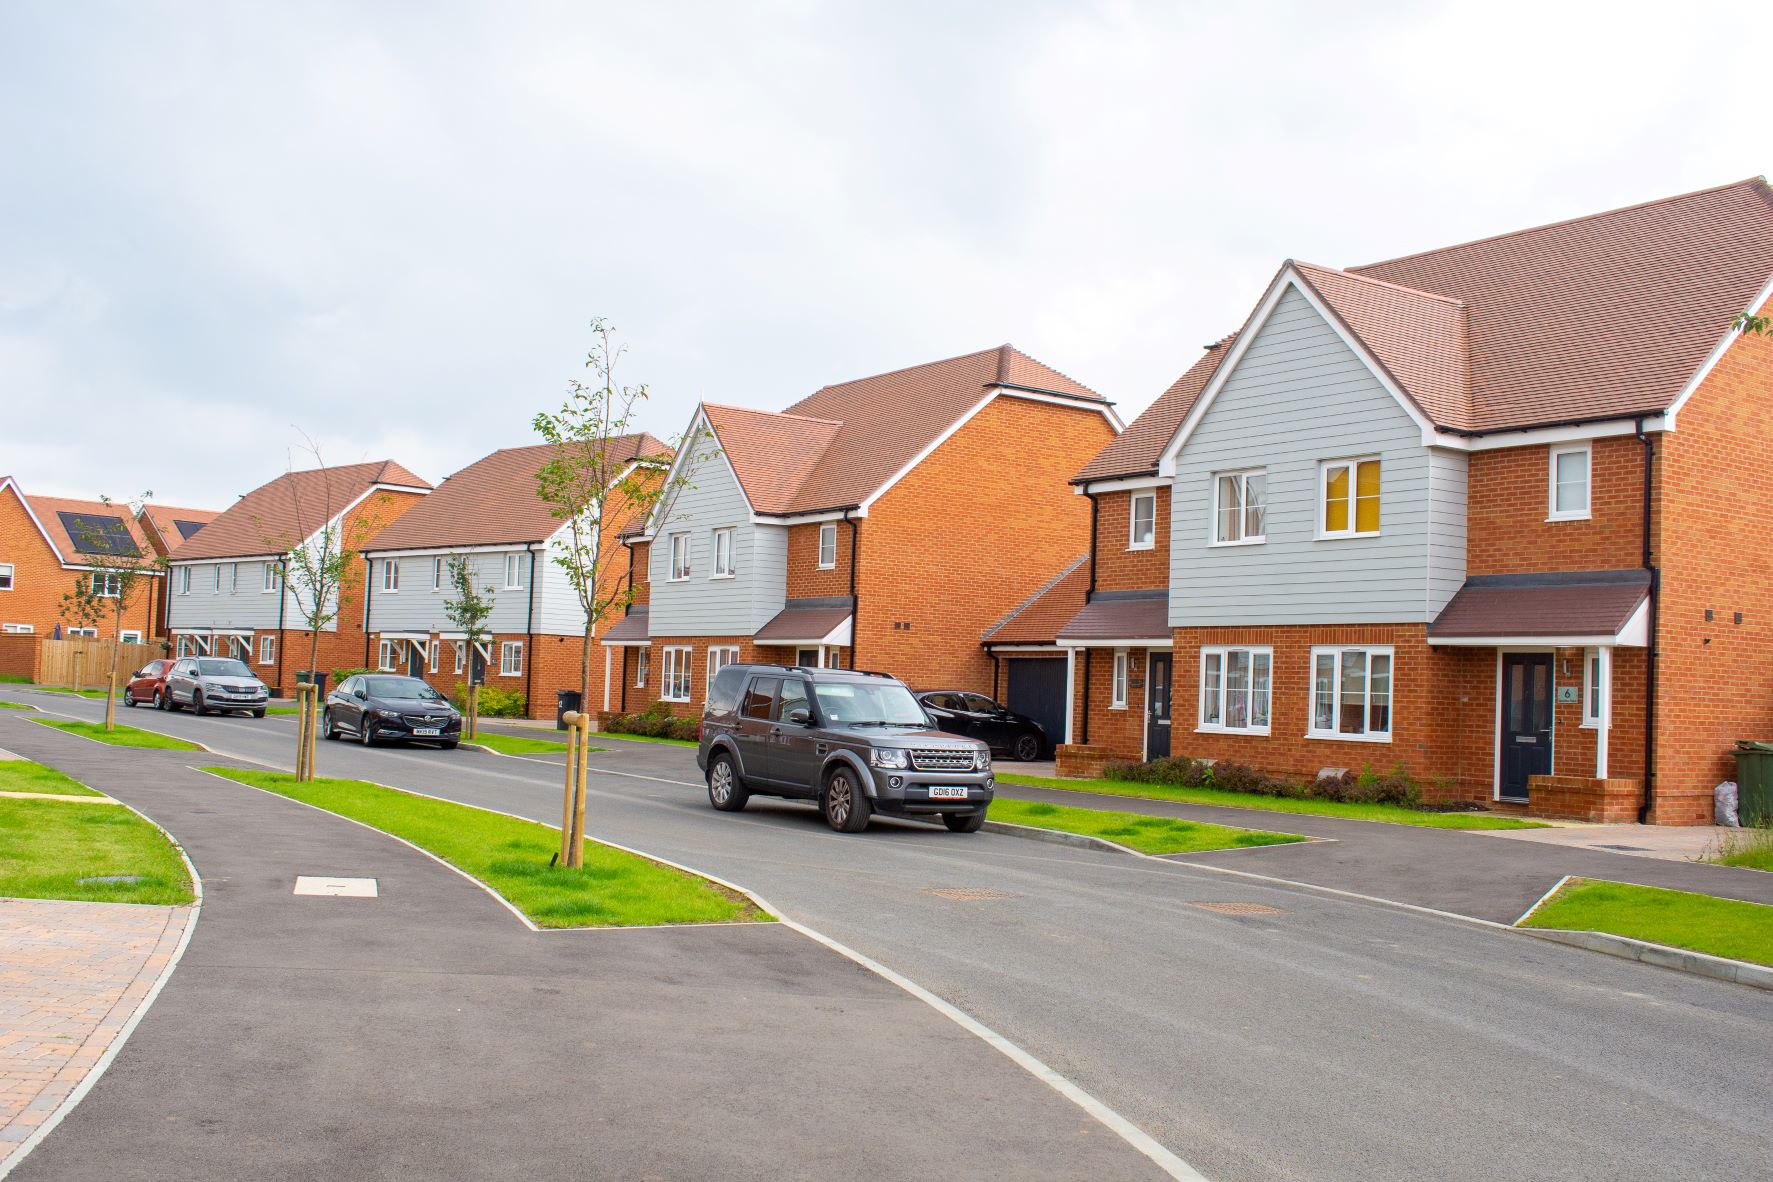 All Homes Sold at Development in Otham